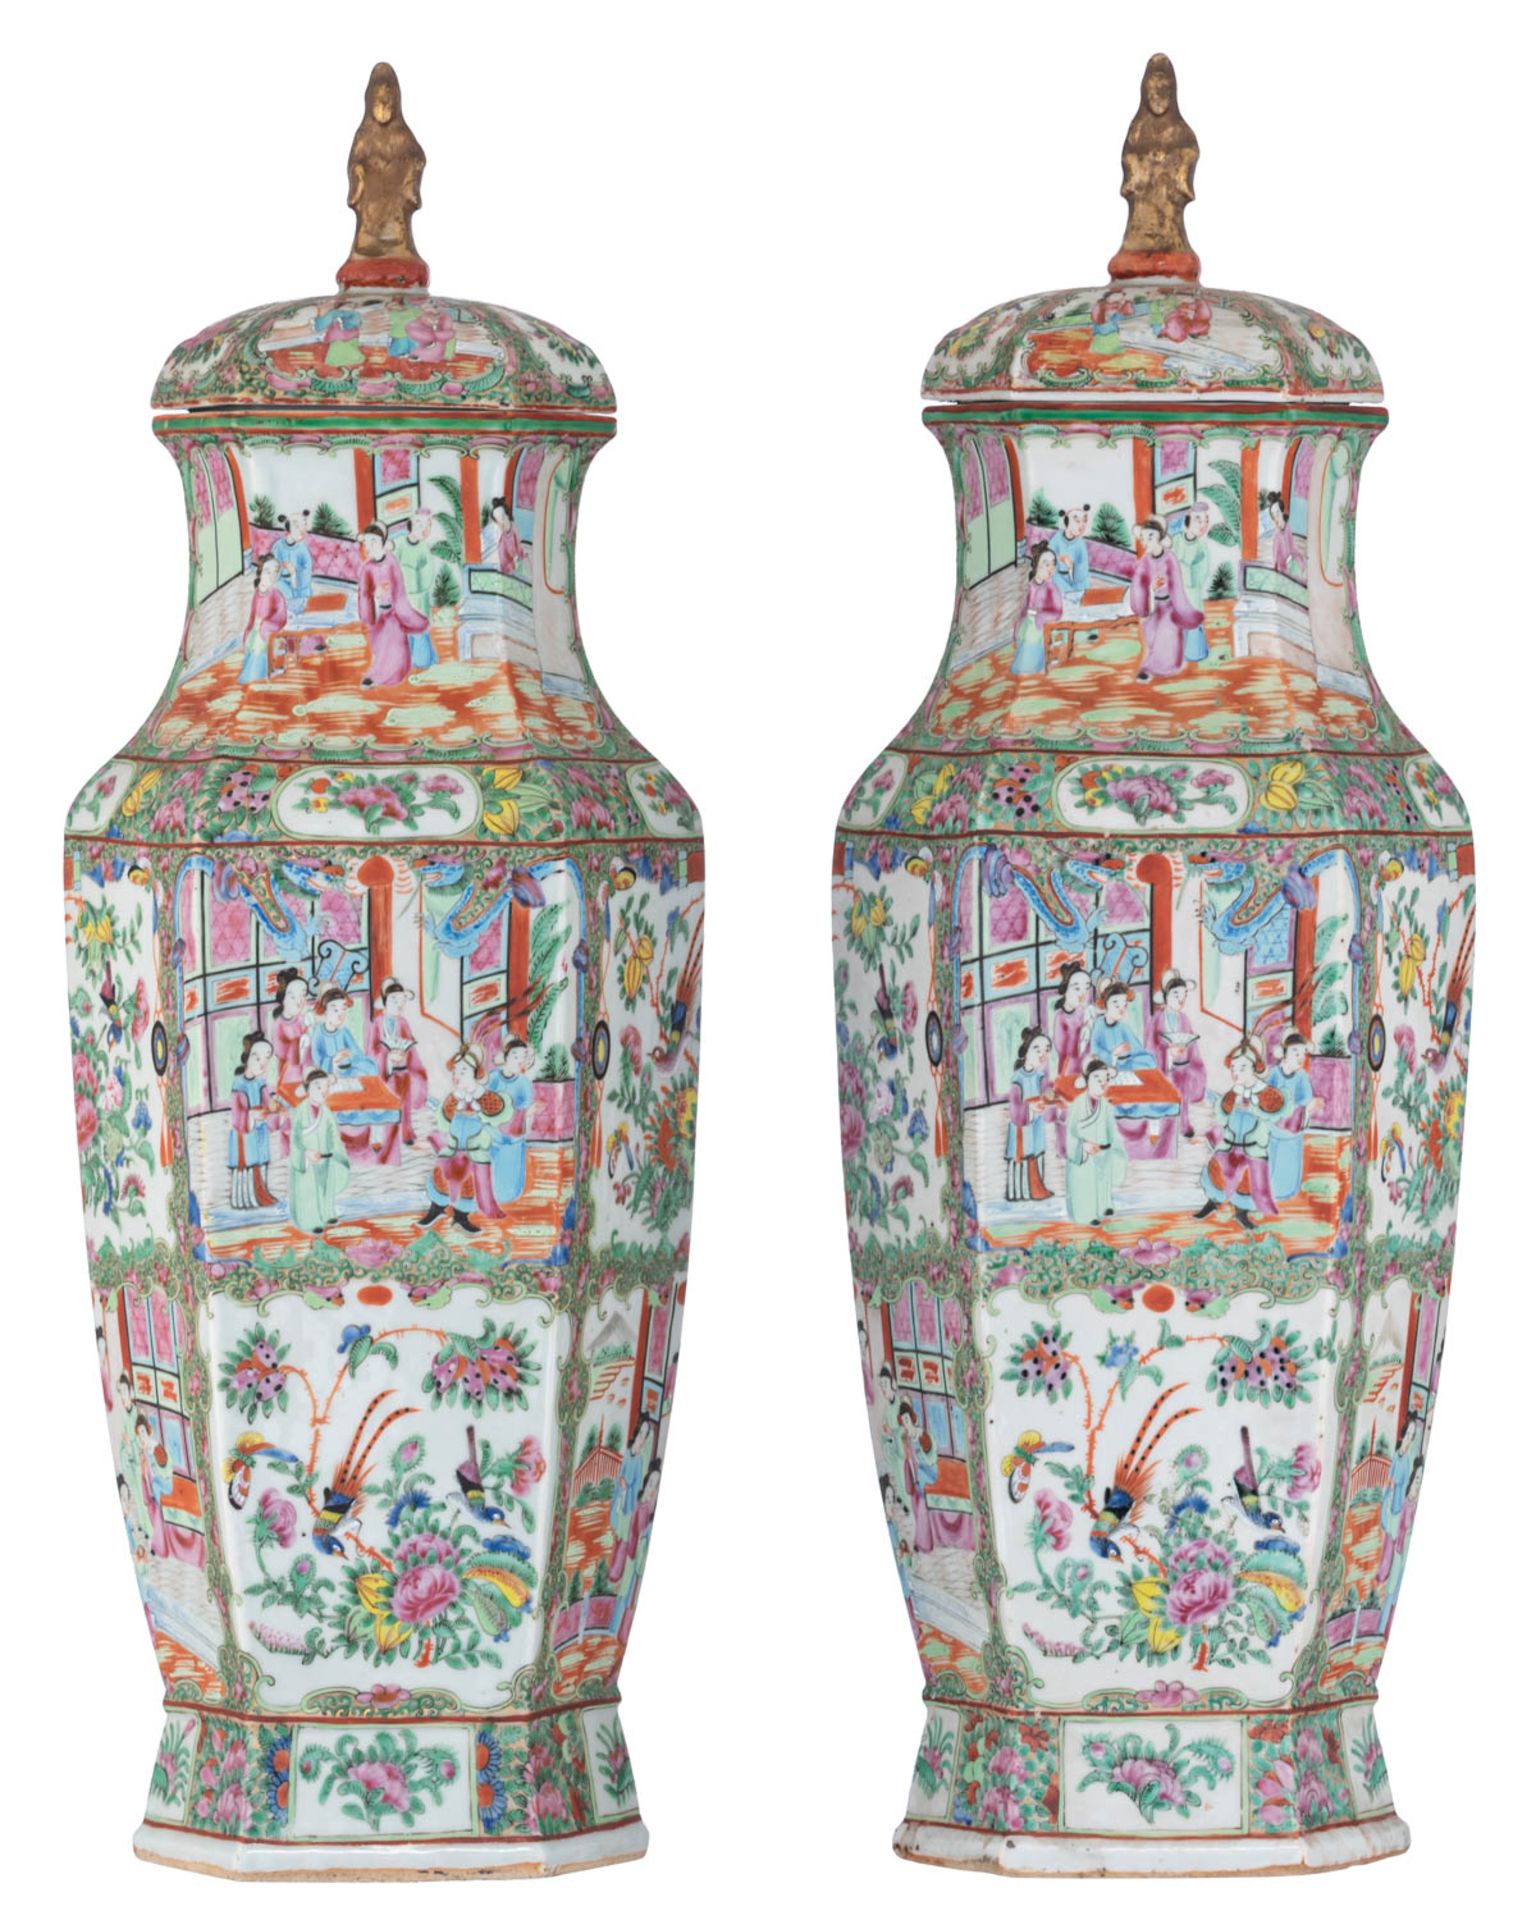 A pair of Chinese Canton famille rose lantern-shaped vases